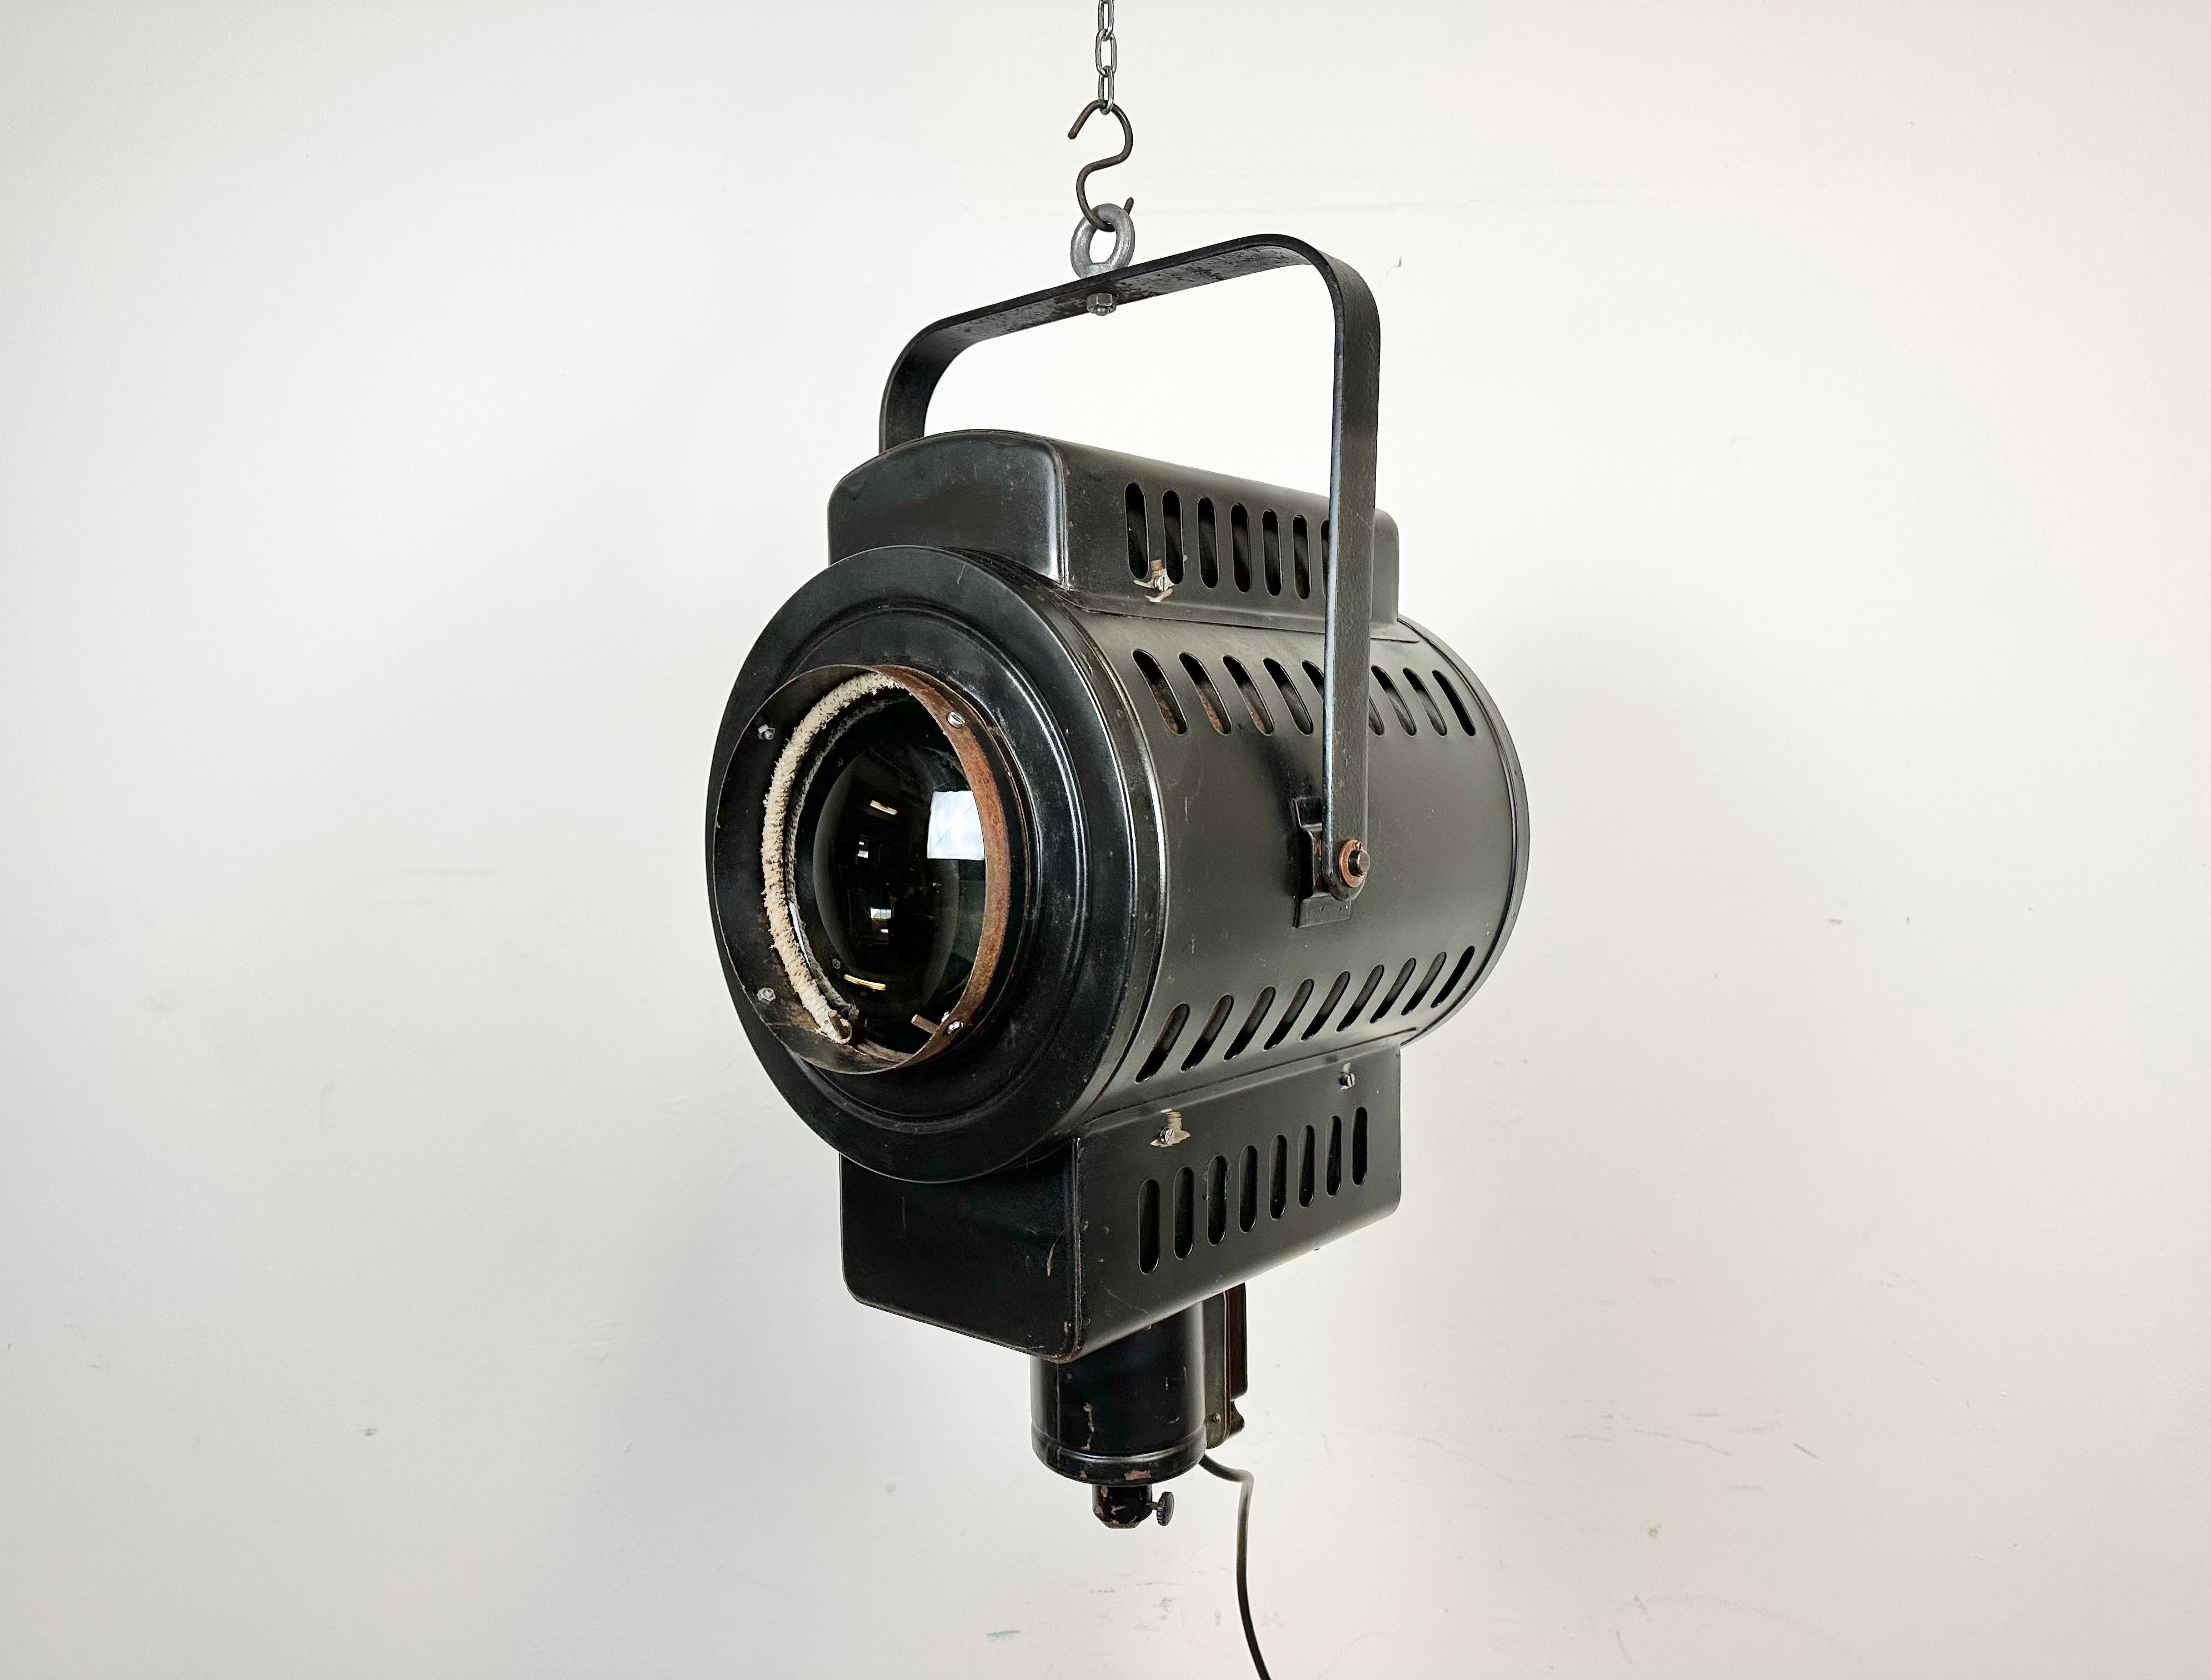 - Vintage theatre spotlight made in former Czechoslovakia during the 1960s 
- It features a black metal body and clear glass lens cover
- The porcelain socket requires E27/ E26 lightbulbs 
- New wire
-The height of the spotlight is 50 cm. With